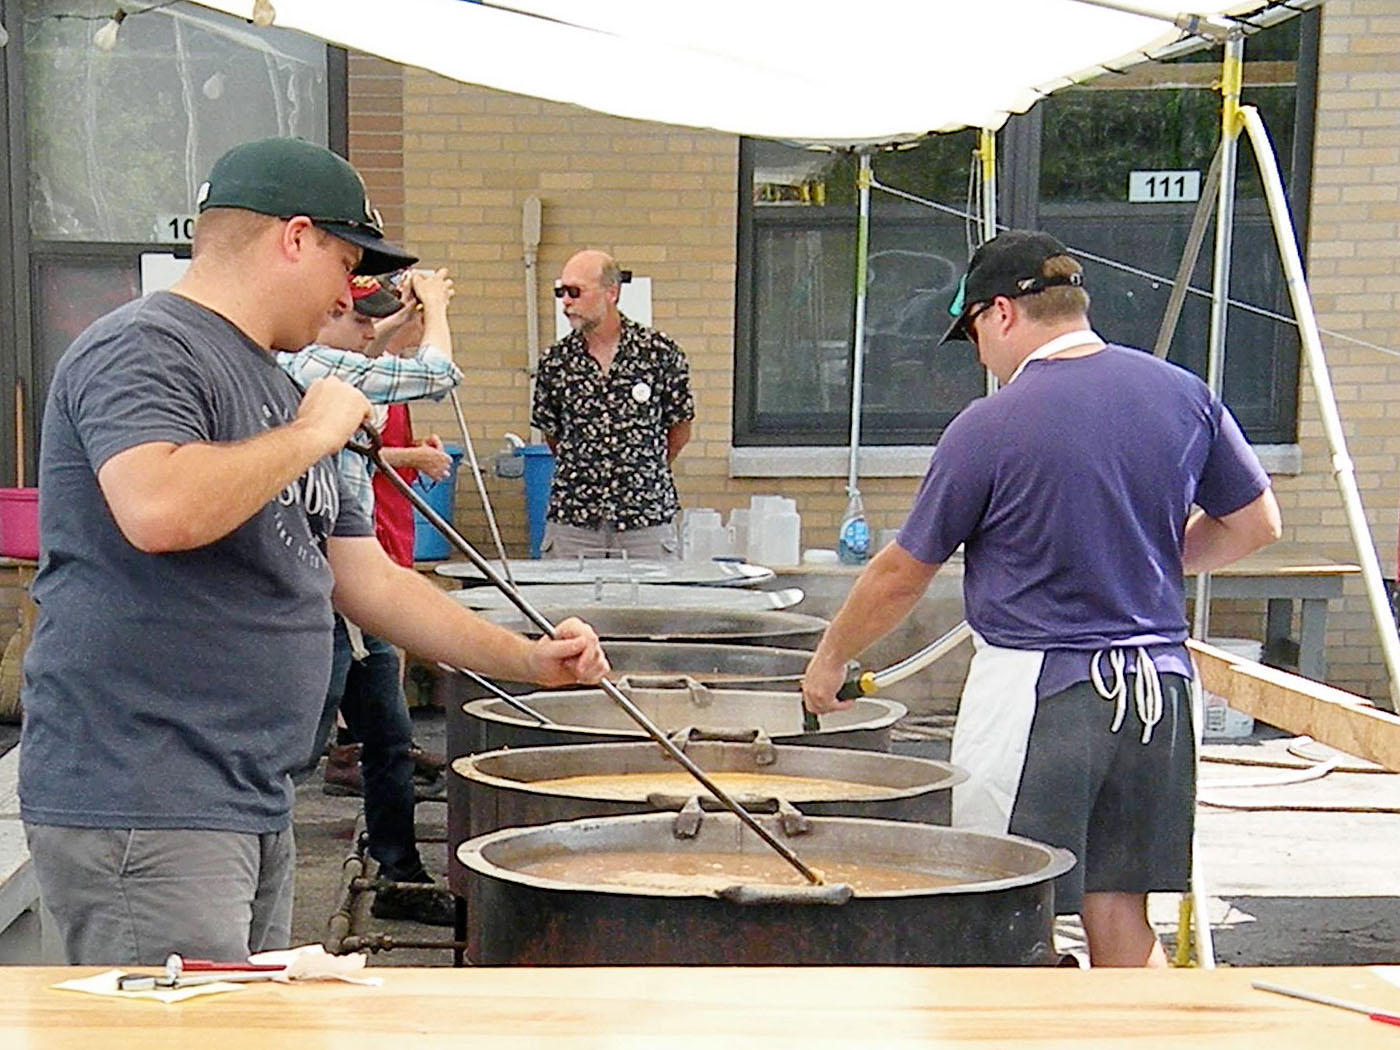 Volunteers stir clam chowder at the Church of the Annunciation picnic. (Courtesy of Church of the Annunciation)